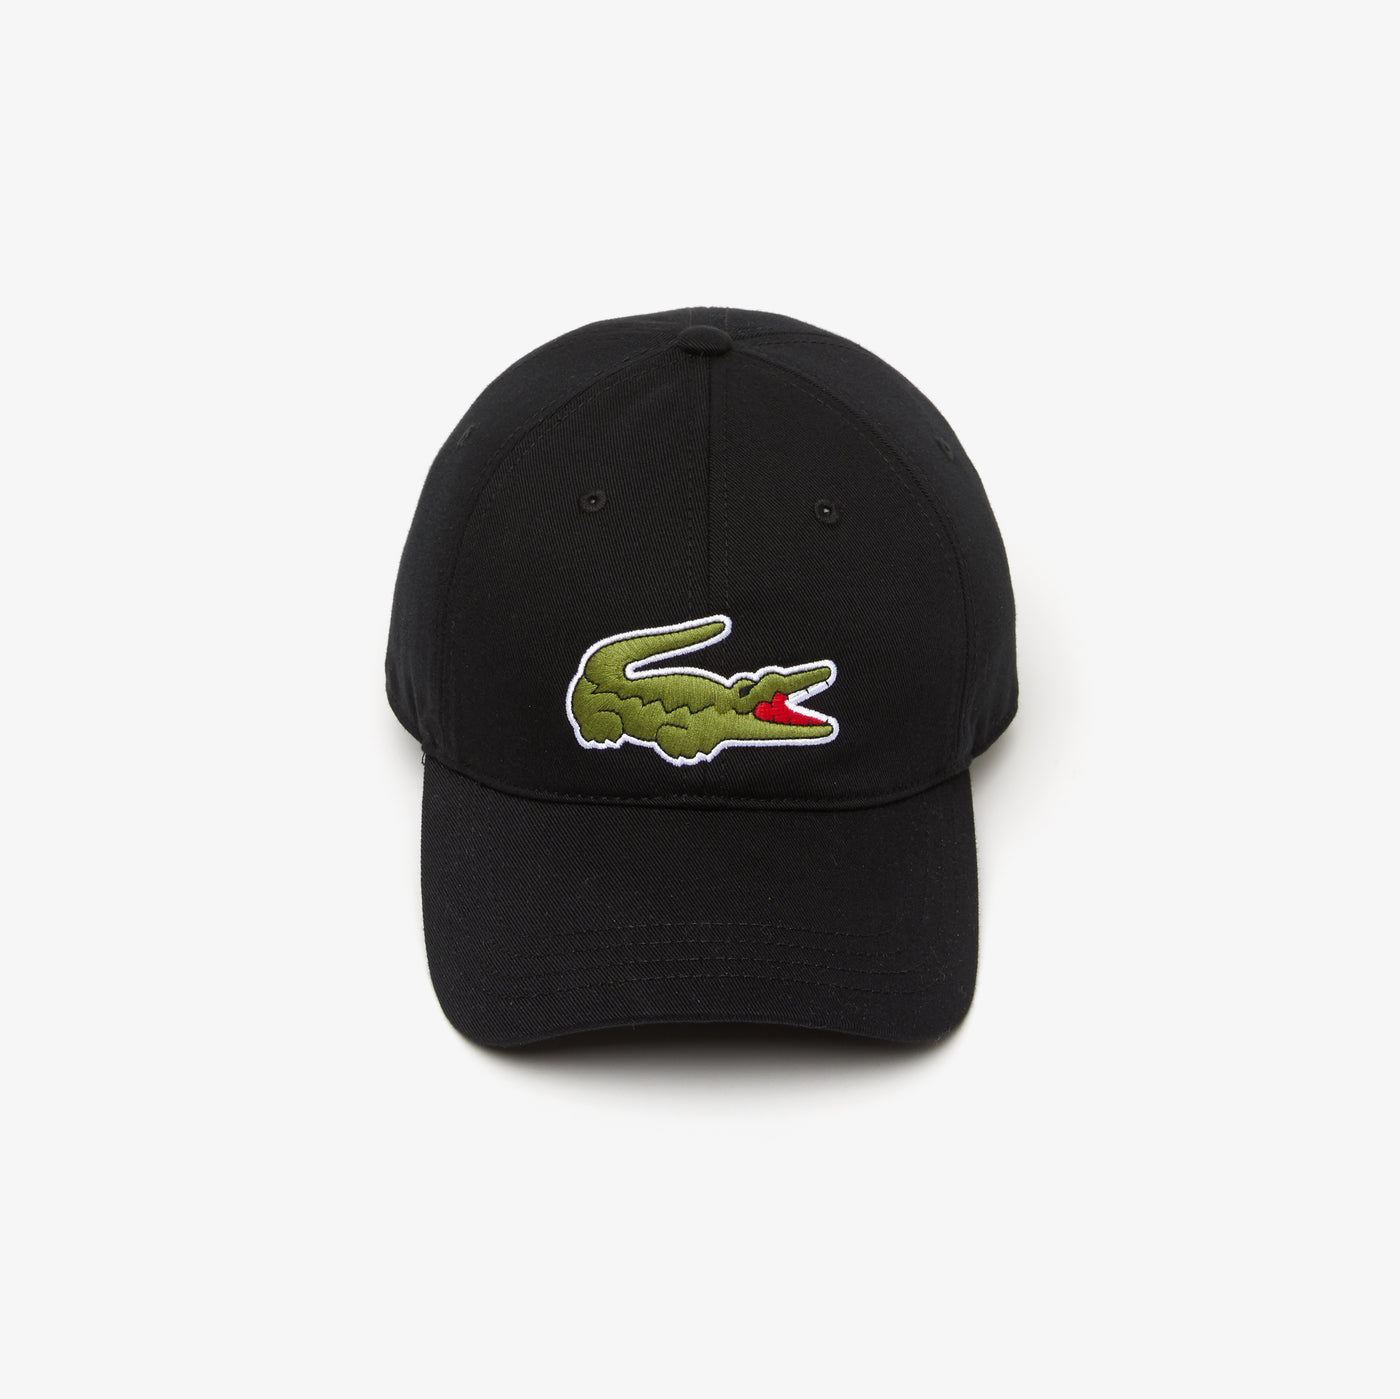 Shop The Latest Collection Of Lacoste Unisex Lacoste Adjustable Organic Cotton Twill Cap - Rk9871 In Lebanon